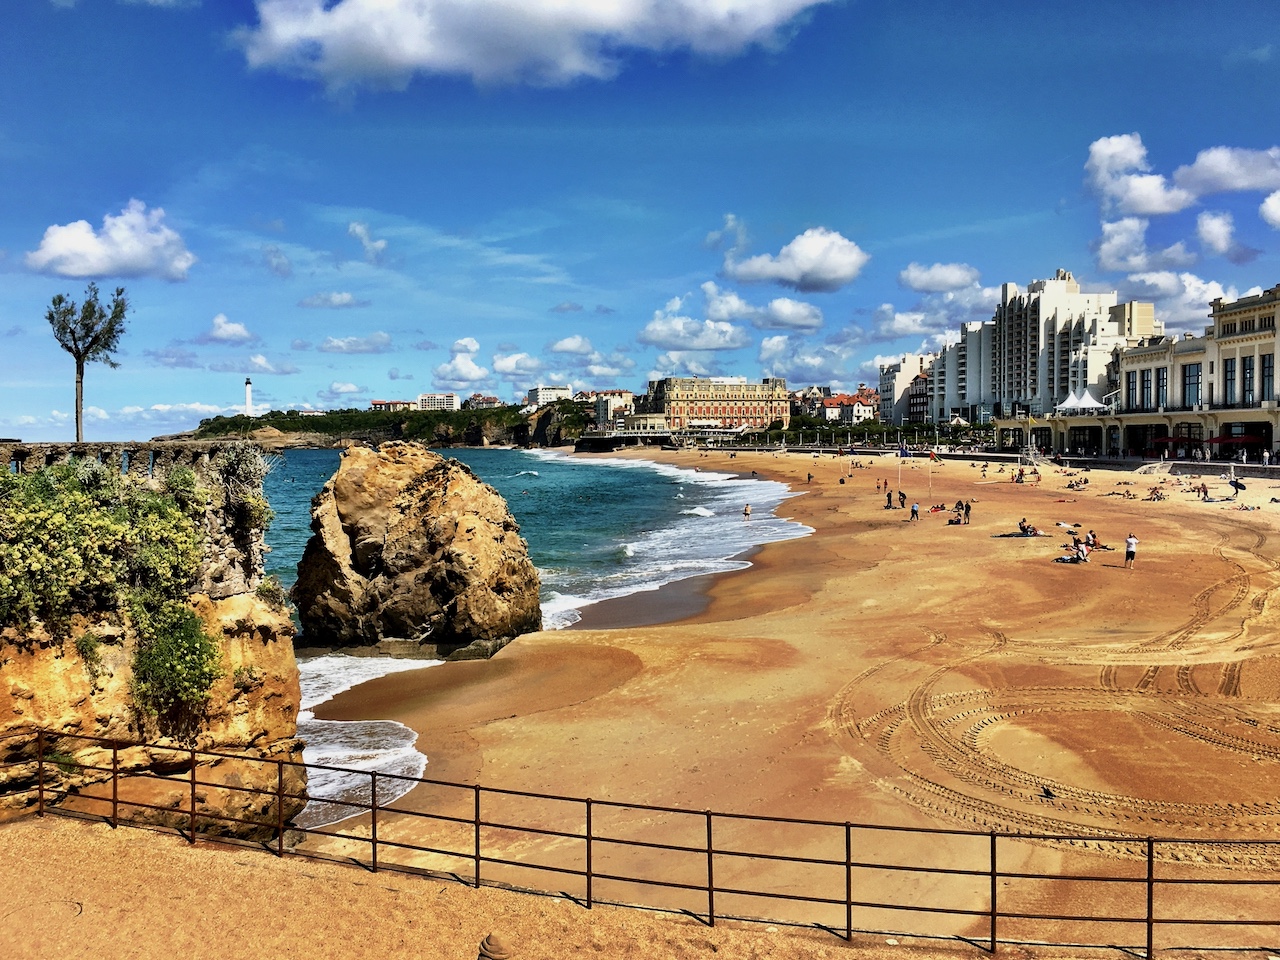 Biarritz's stunning, manicured beaches with darling cafes